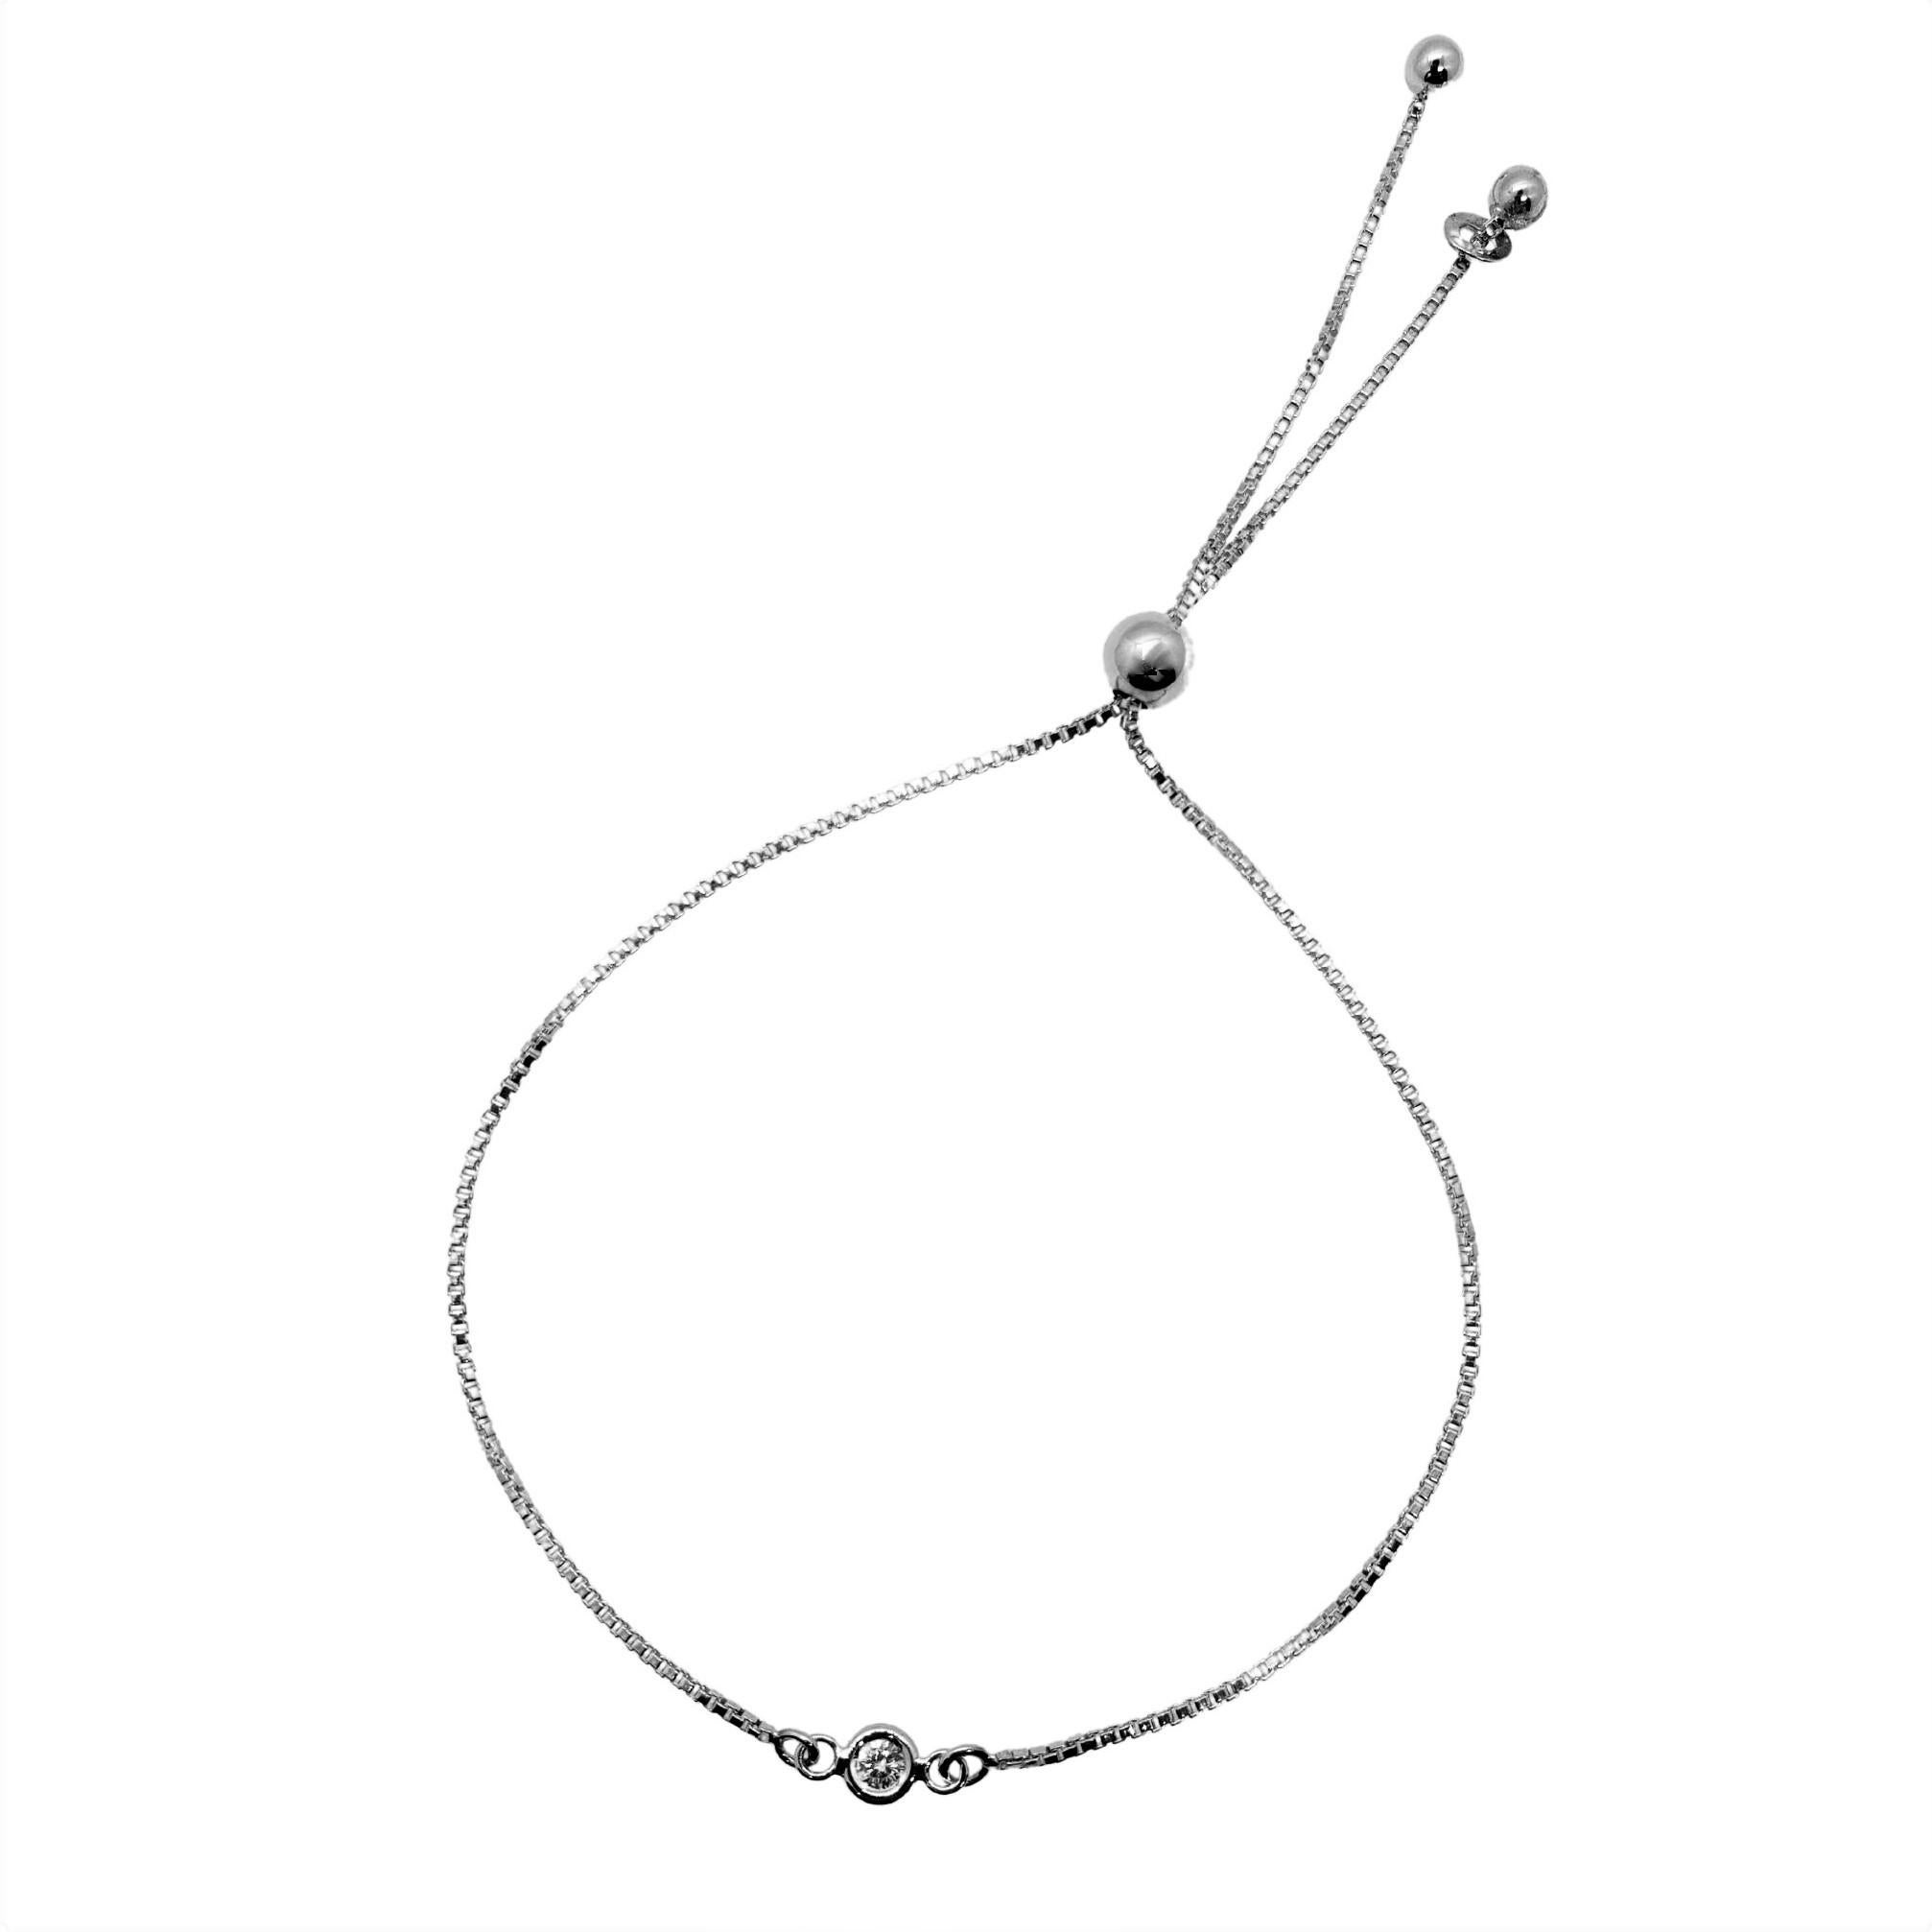 Brilliant easy to wear stackable sterling silver bracelet with a center Diamond set in a Silver bagel bezel. Very chic especially worn in multiples.  A main large sliding silver bead can enlarge or reduce the wrist size of the box chain to perfectly